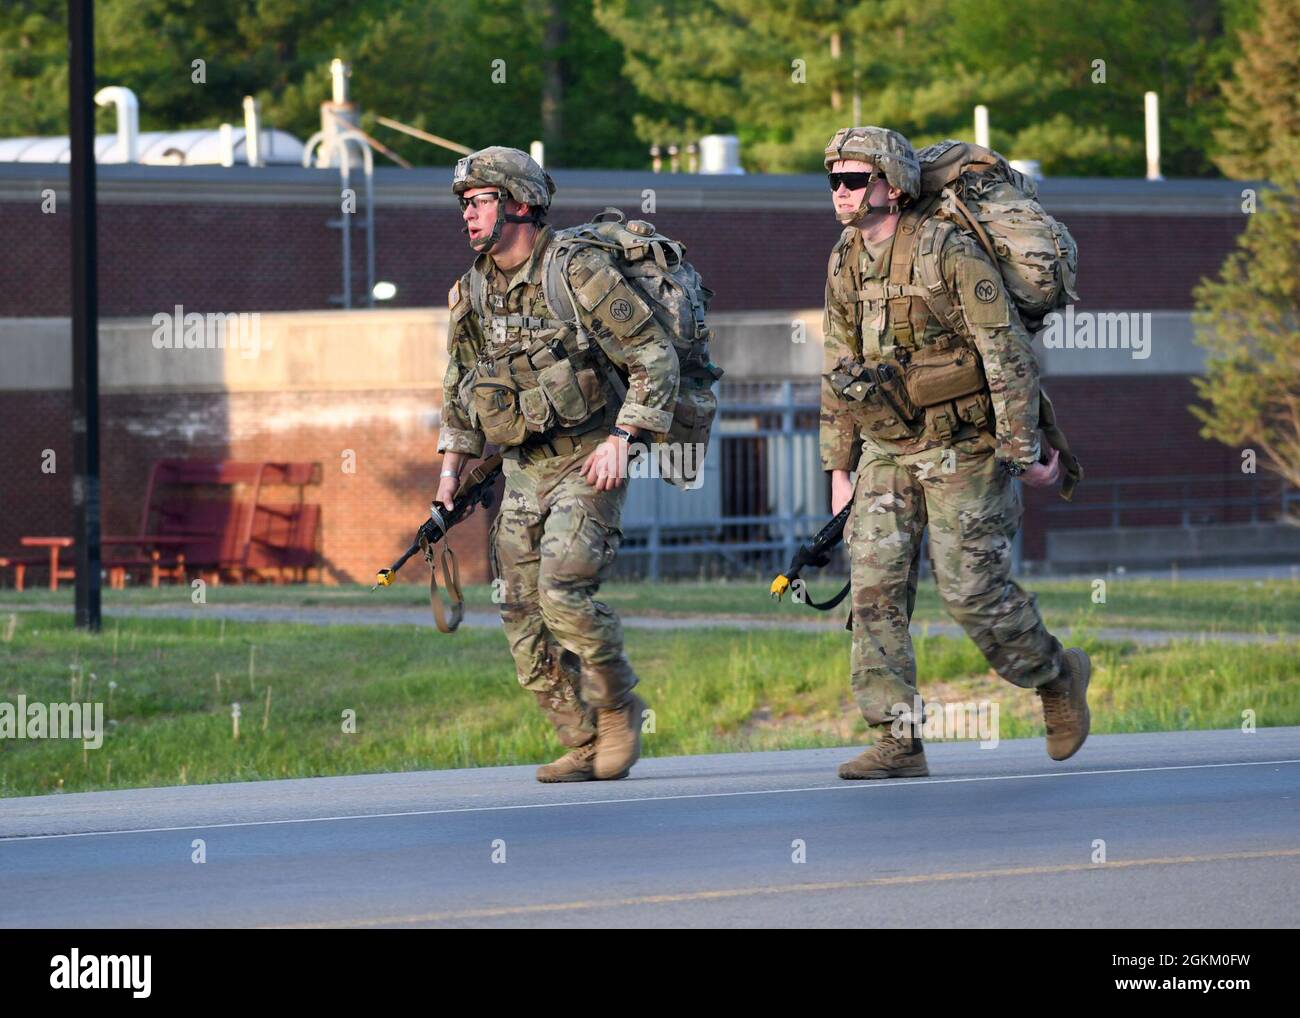 FORT DRUM, N.Y. – U.S. Army Staff Sgt. Robert Majewski, left, with 2nd Squadron, 101st Cavalry Regiment, and 1st Lt. Phillip Mullen with 1st Battalion, 69th Infantry Regiment, both infantrymen with the New York National Guard, conduct a 12-mile foot march as part of the 10th Mountain Division Expert Infantryman Badge assessment at Fort Drum, N.Y., May 21, 2021. Stock Photo